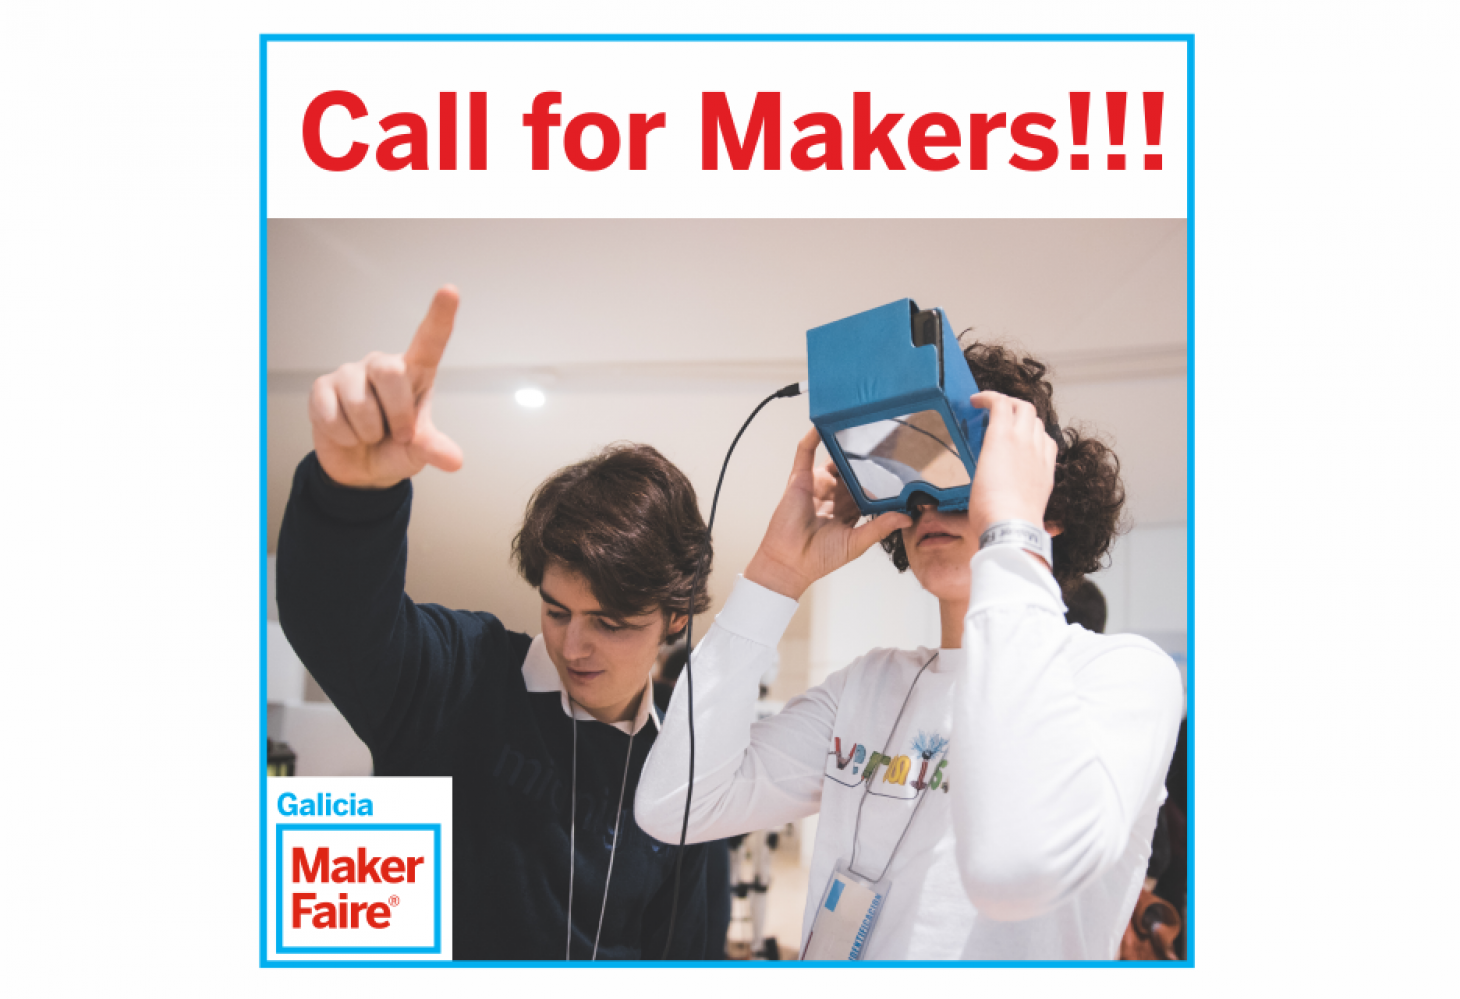 Participate in the Maker Faire Galicia - The Call for Makers is open